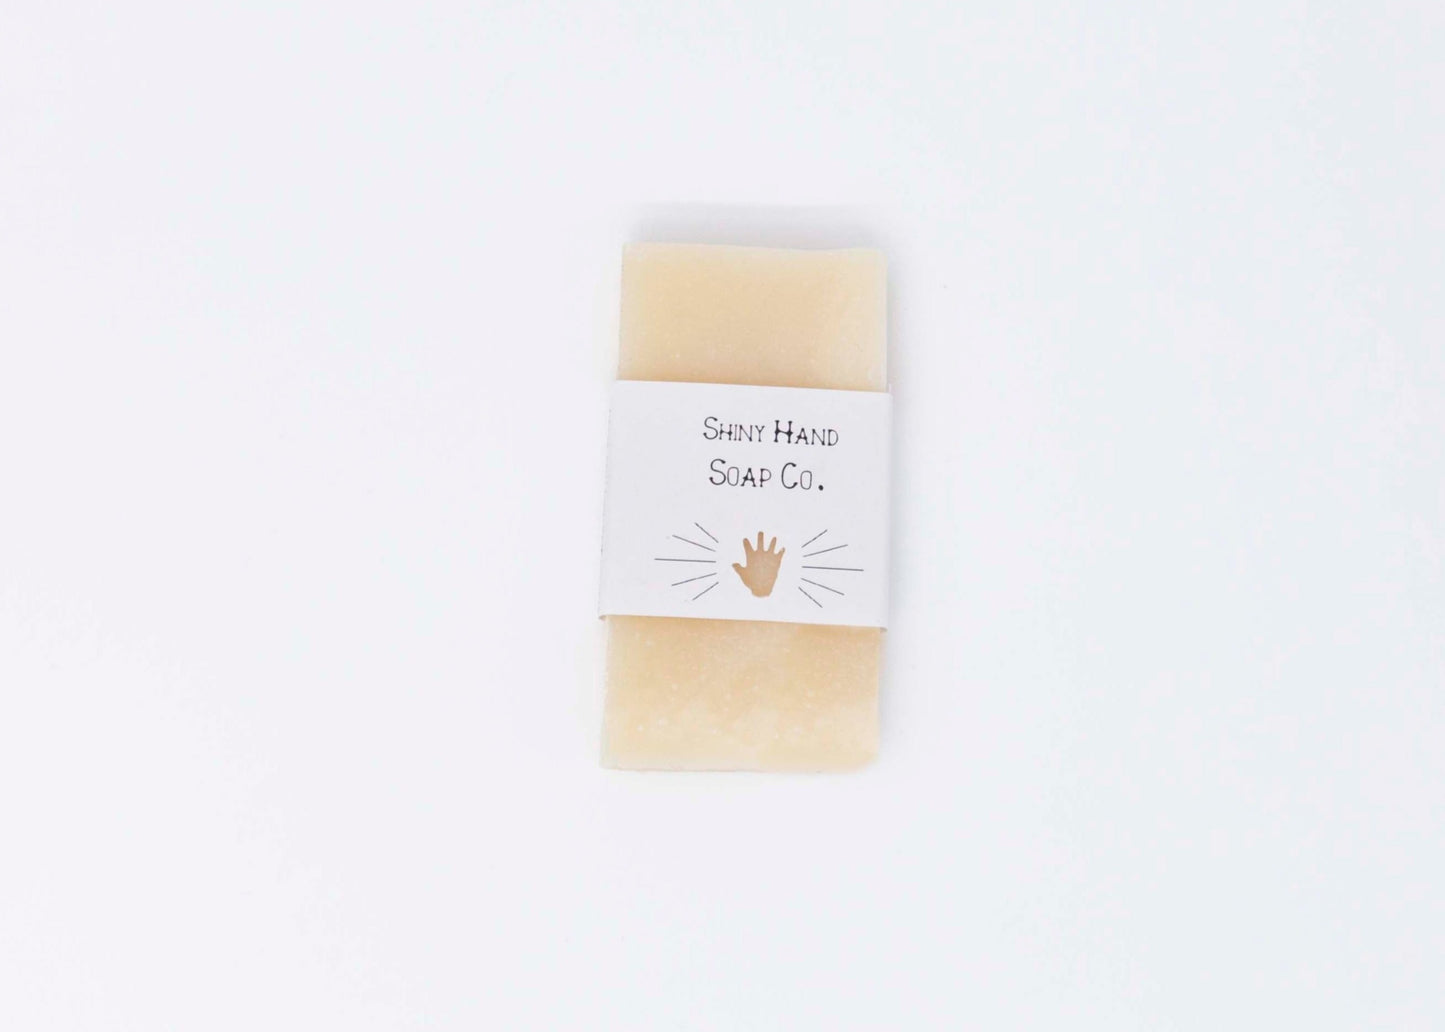 One creamy ivory white miniature bar of Avocado Butter bar soap sits on a clean white background with a white paper wrapper that has a hand shape cut out of it.